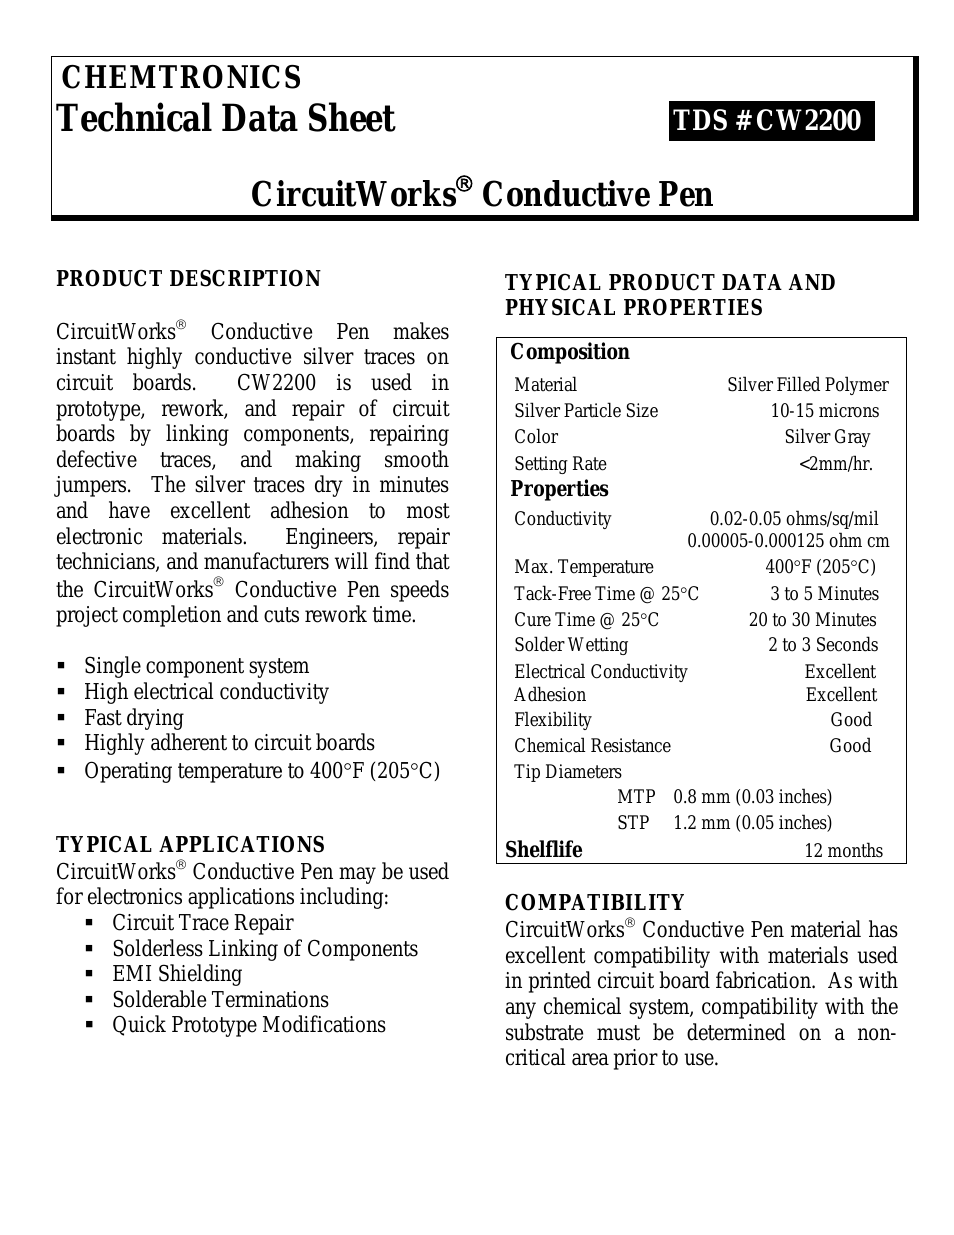 CircuitWorks® Conductive Pen CW2200MTP